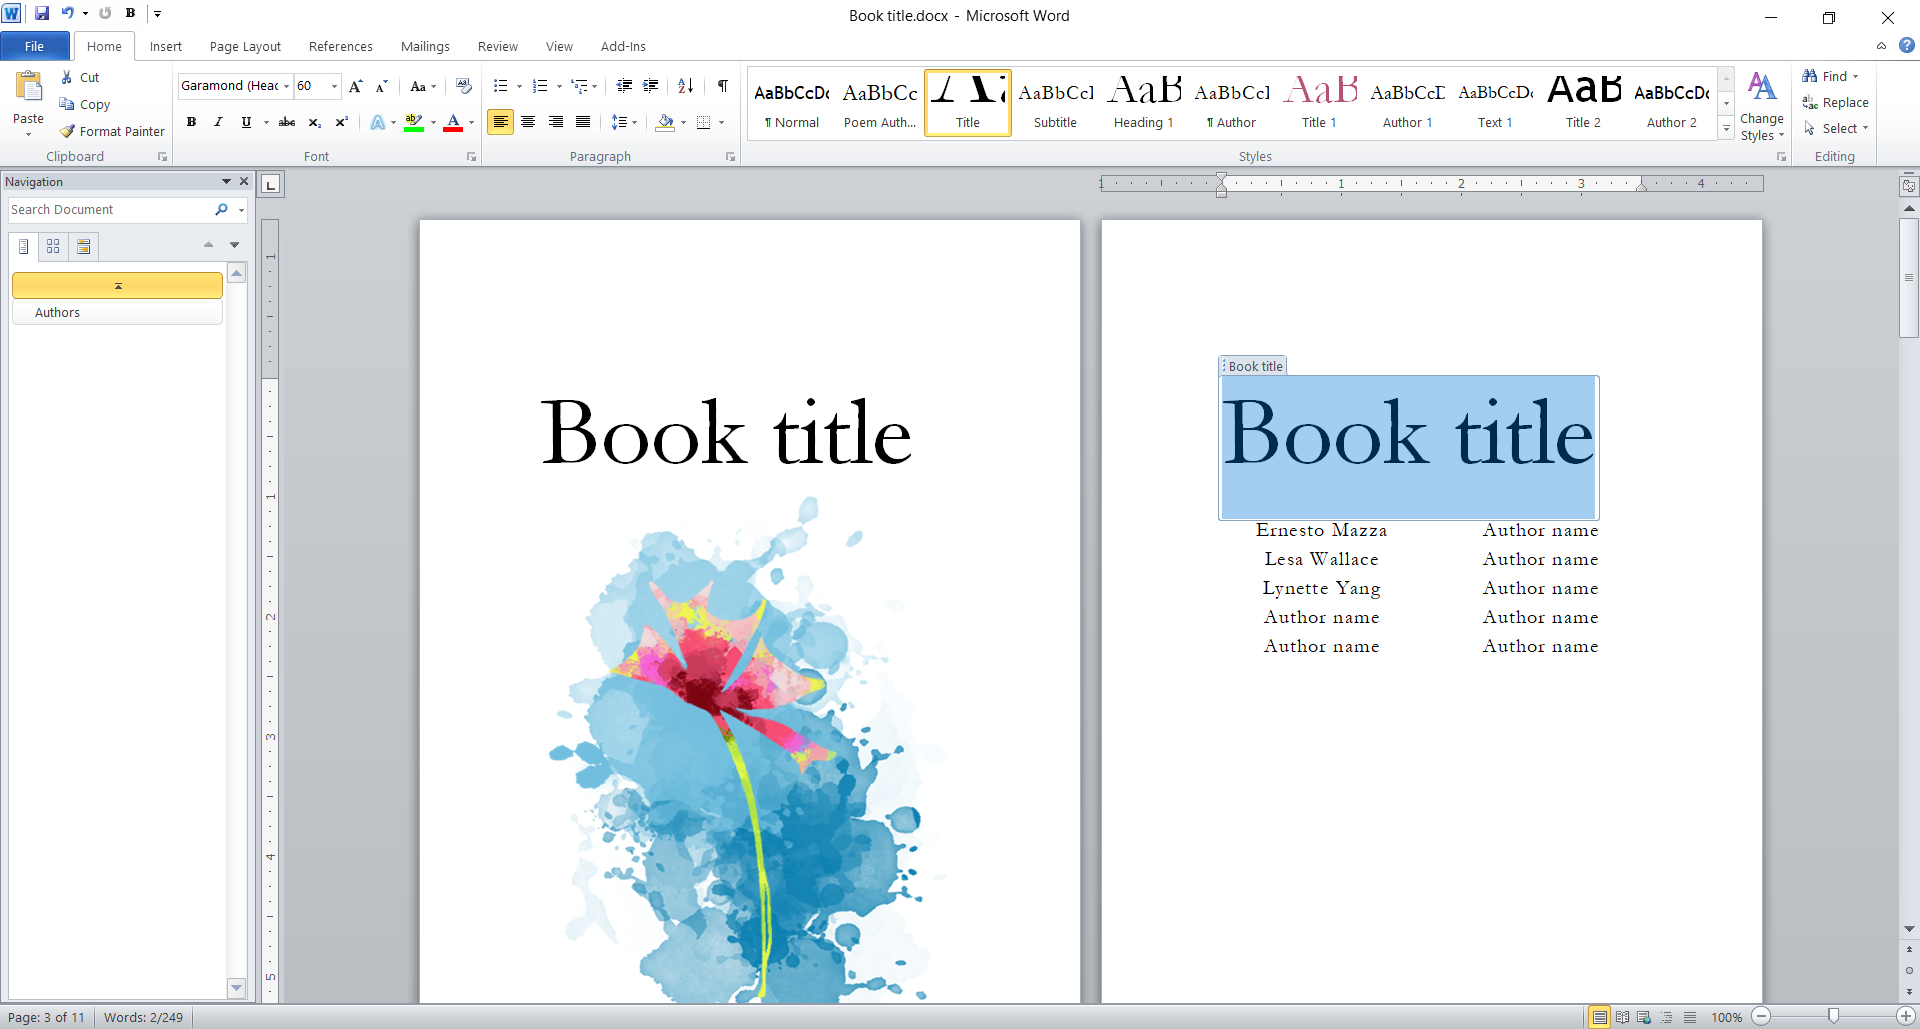 How to make a Word document into a book format using Microsoft Word?